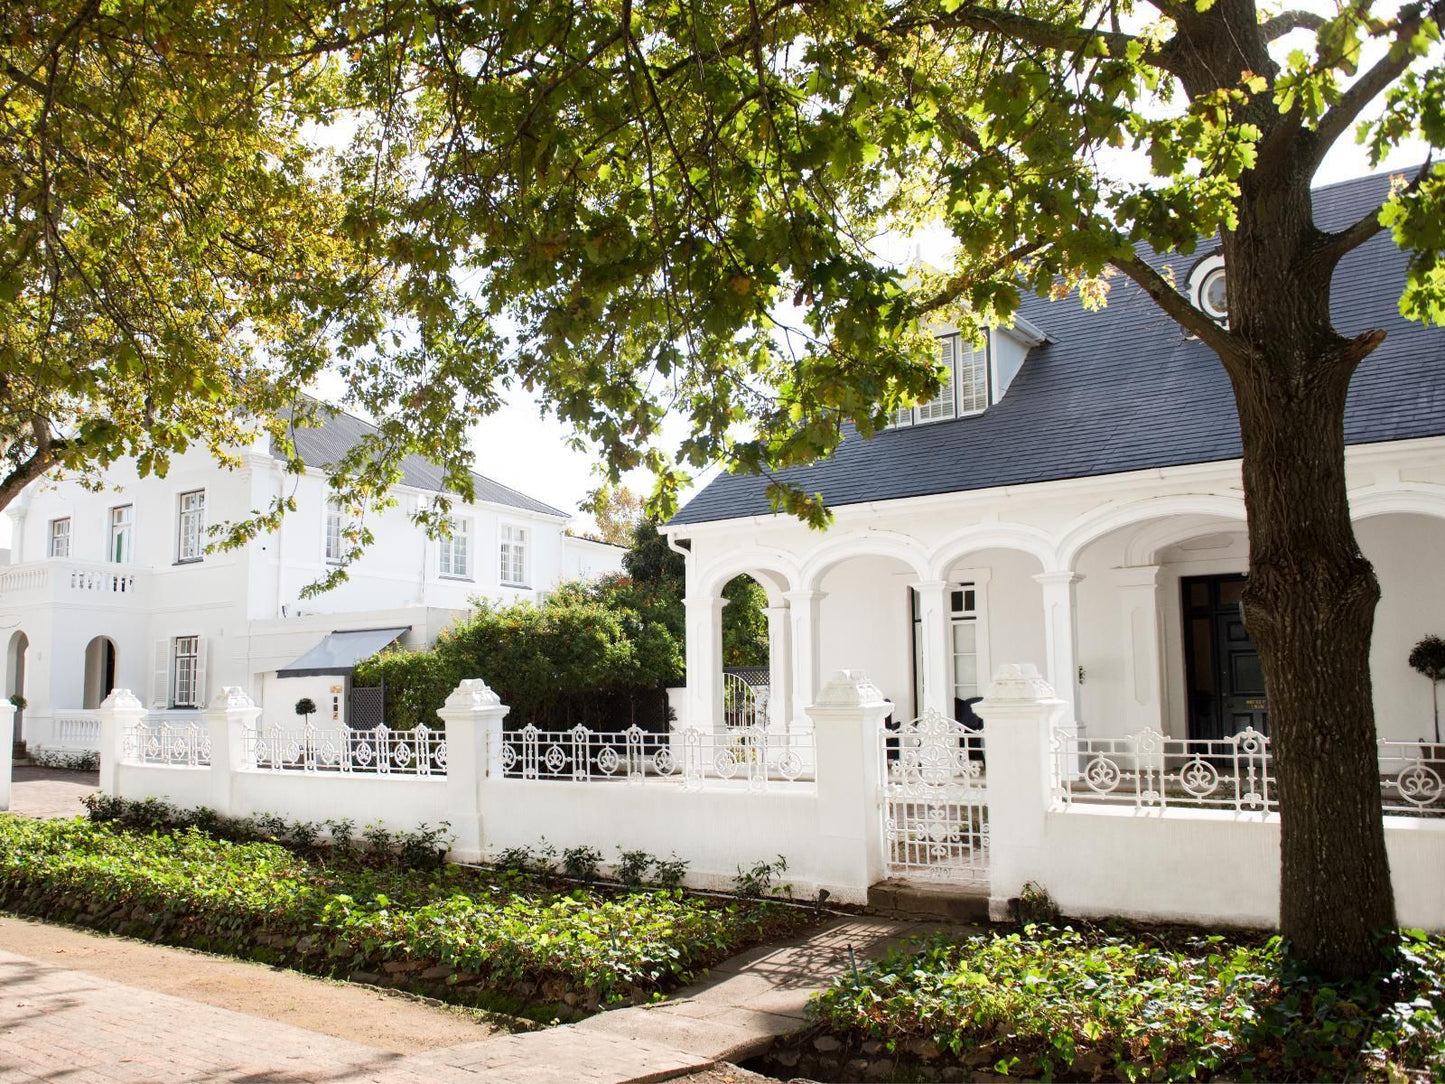 River Manor Boutique Hotel And Spa Stellenbosch Western Cape South Africa House, Building, Architecture